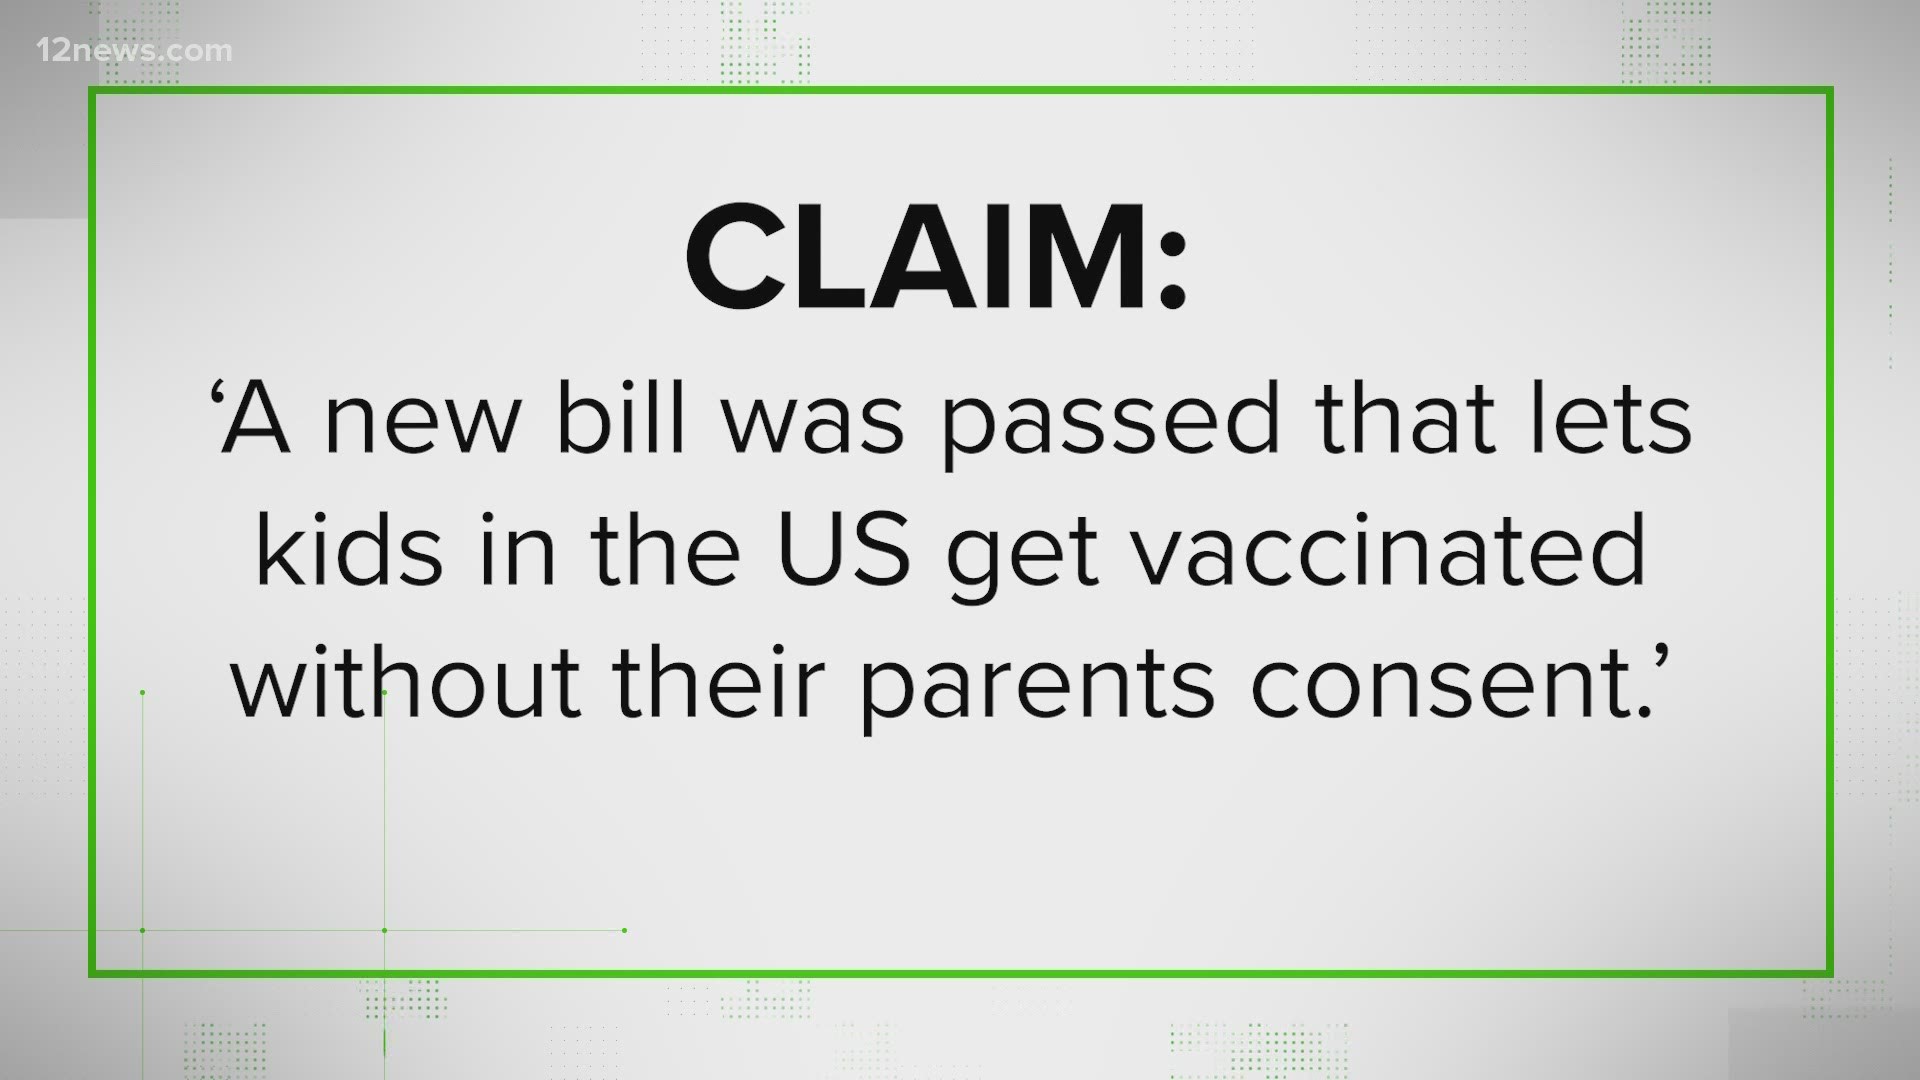 The Verify Team is looking into a claim that a new bill was passed that allows kids in the U.S. to get a COVID-19 vaccine without parental consent.